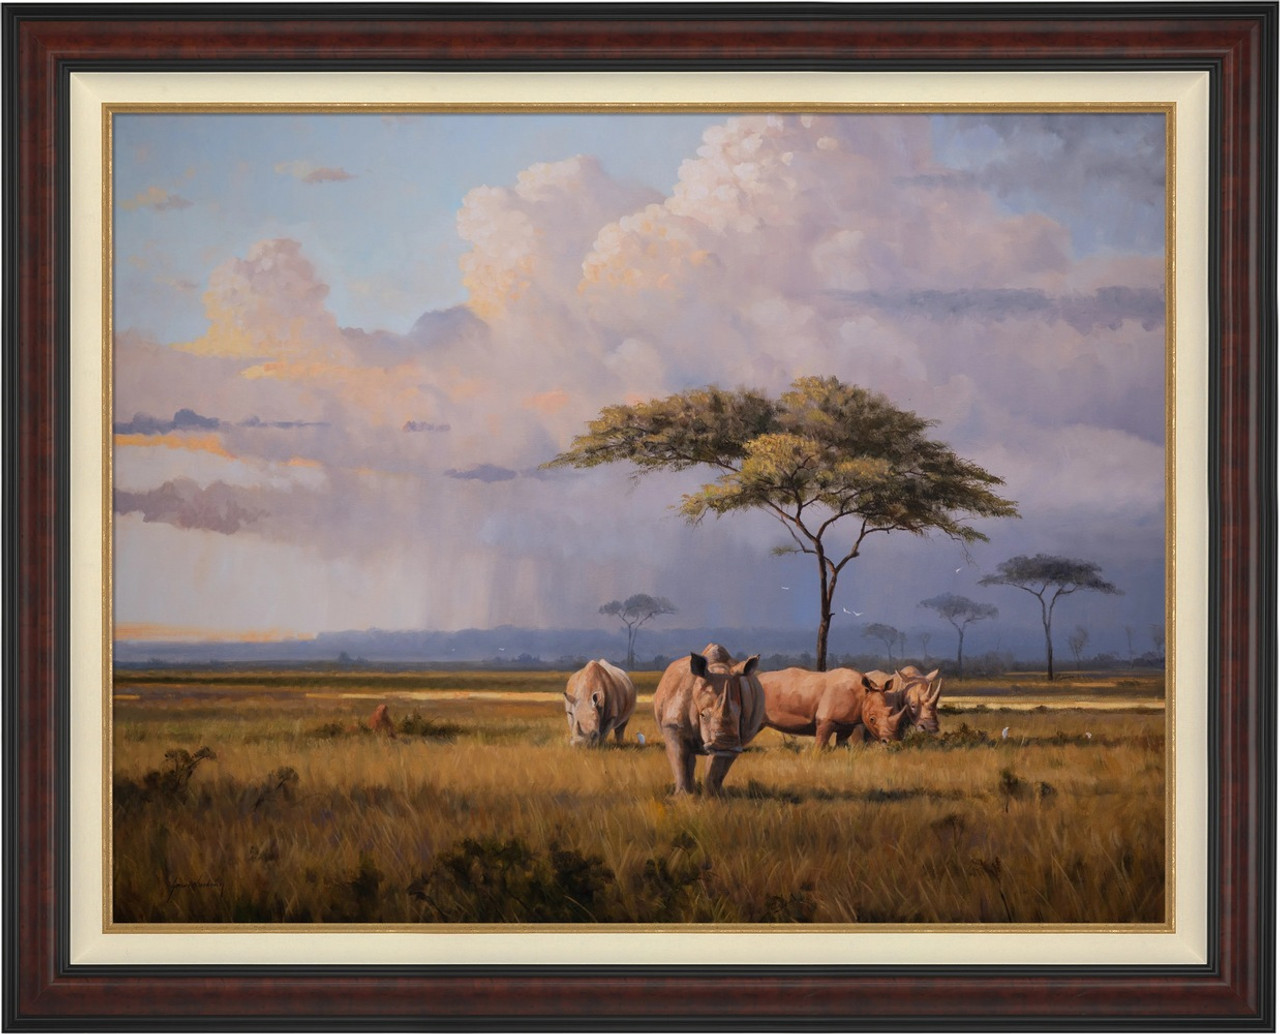 The Plains of Africa Framed Original Painting on Canvas by Grant Hacking